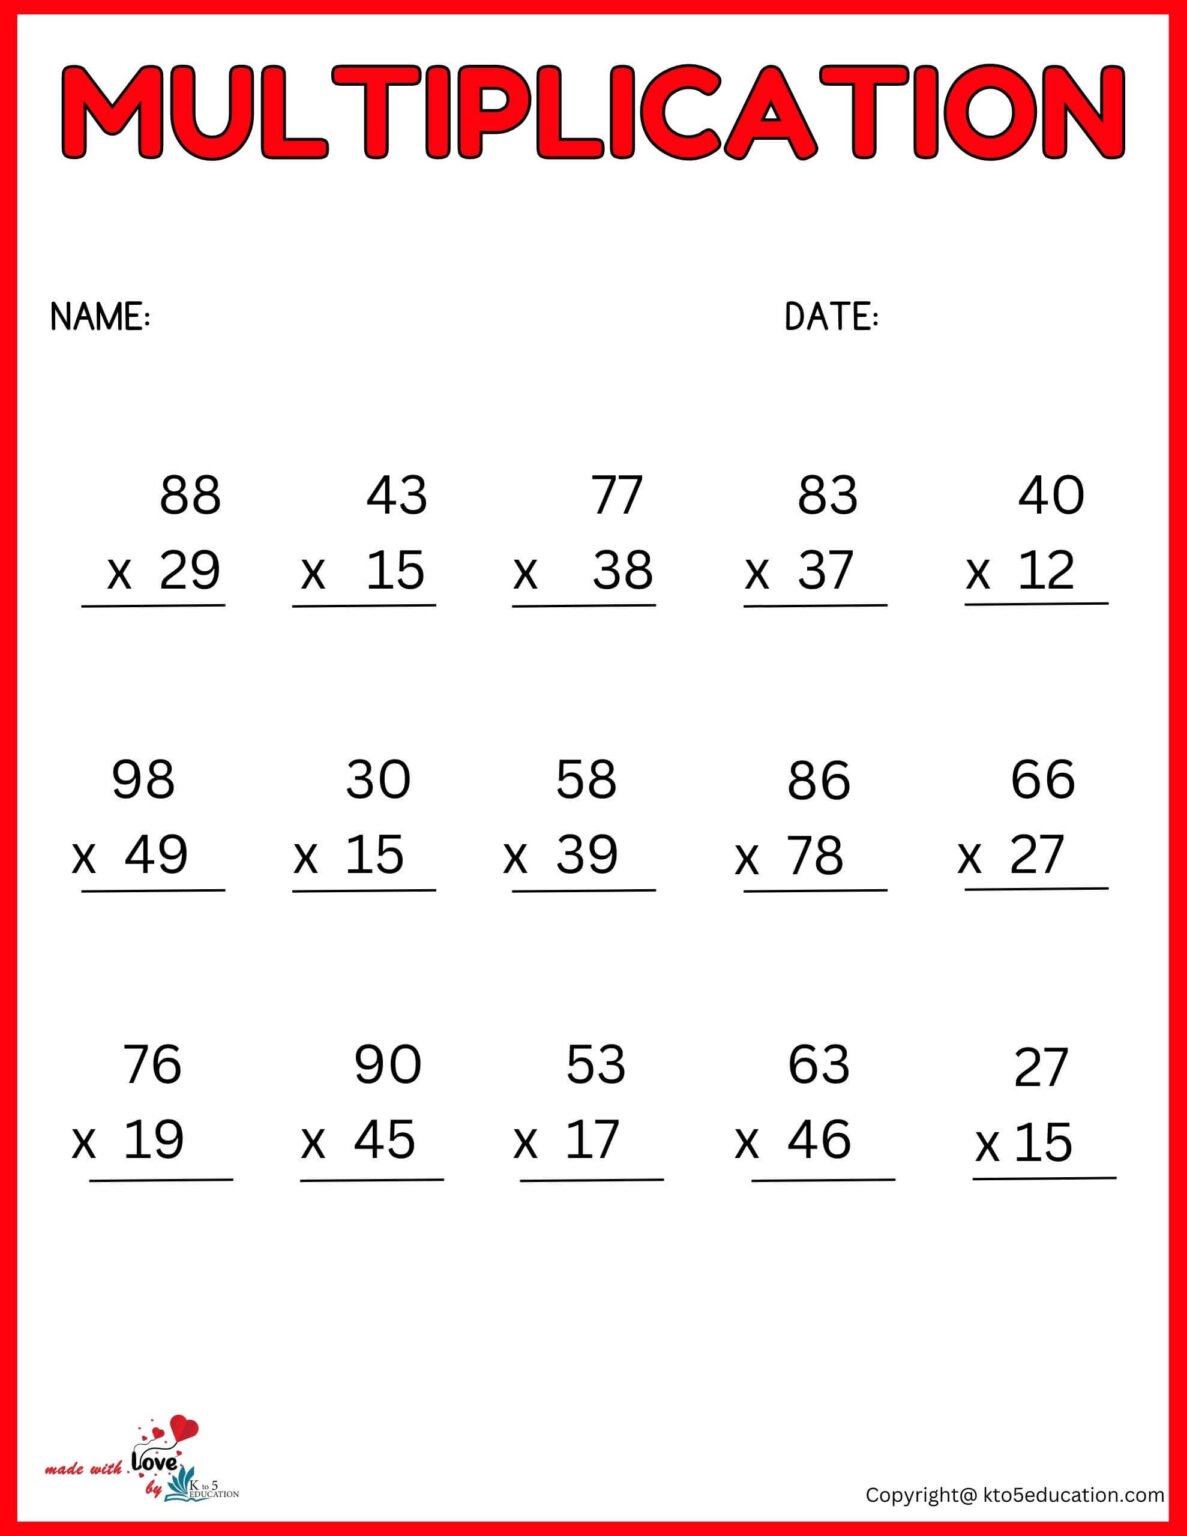 equivalent-fractions-cross-multiplication-strategy-by-artsycraftsyinsped-multiplication-times